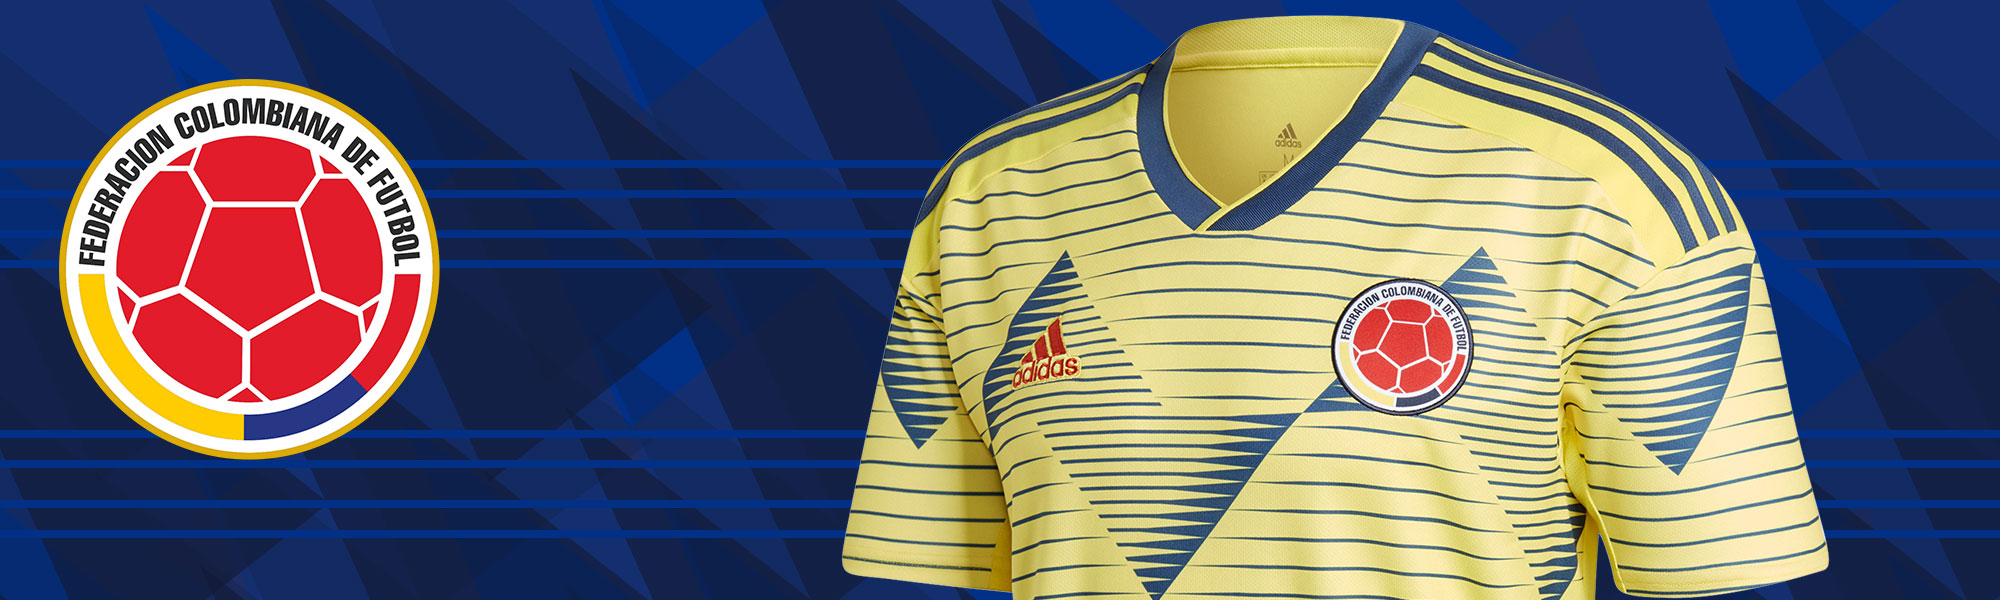 colombia national jersey